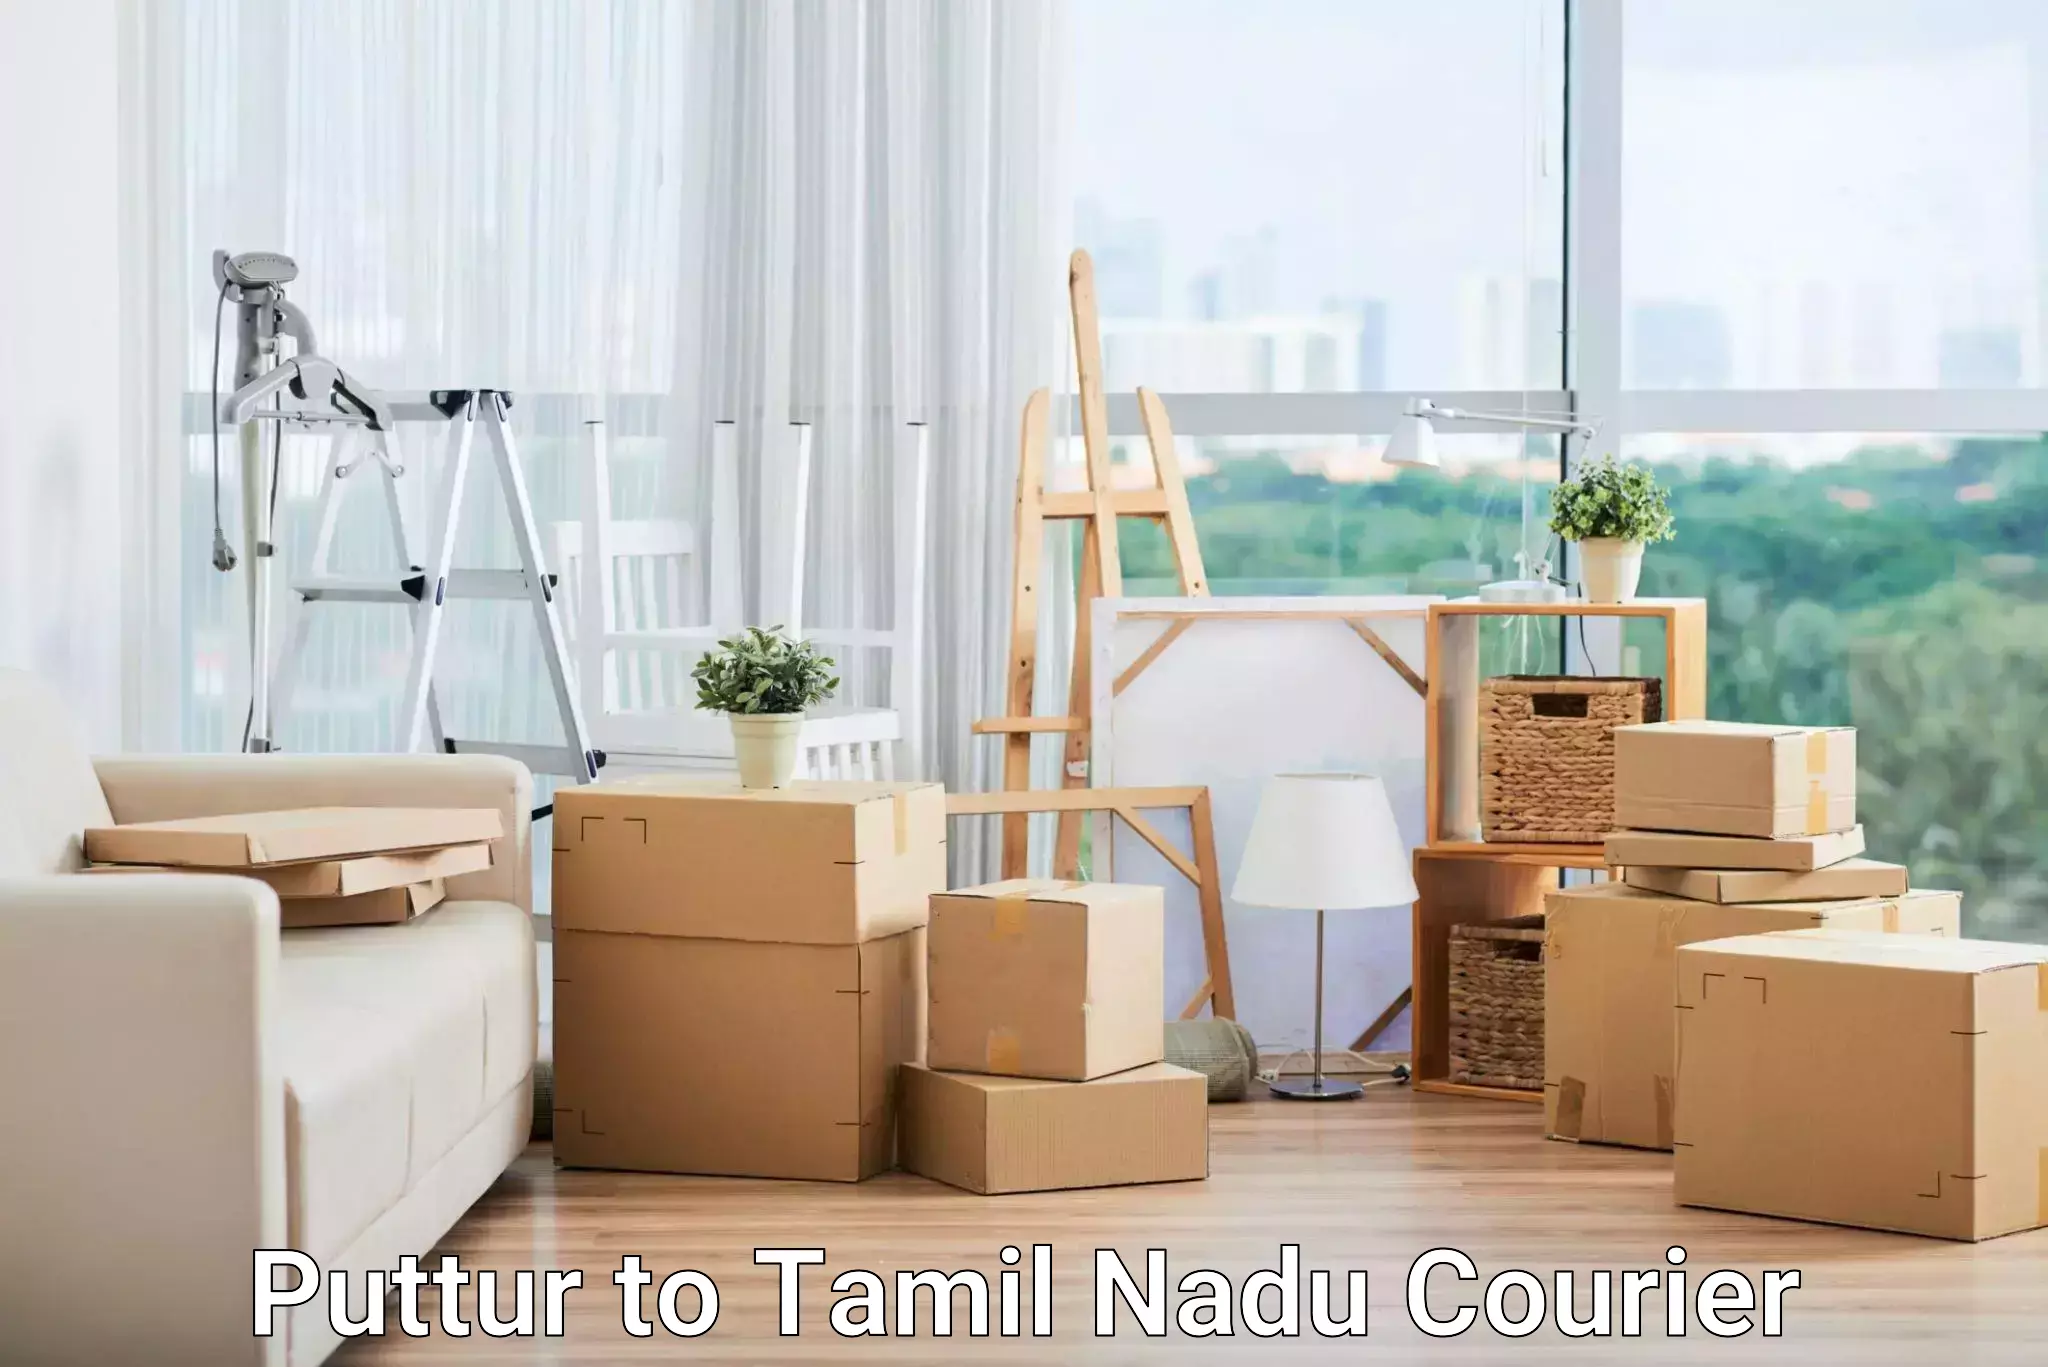 Global shipping networks Puttur to Tamil Nadu